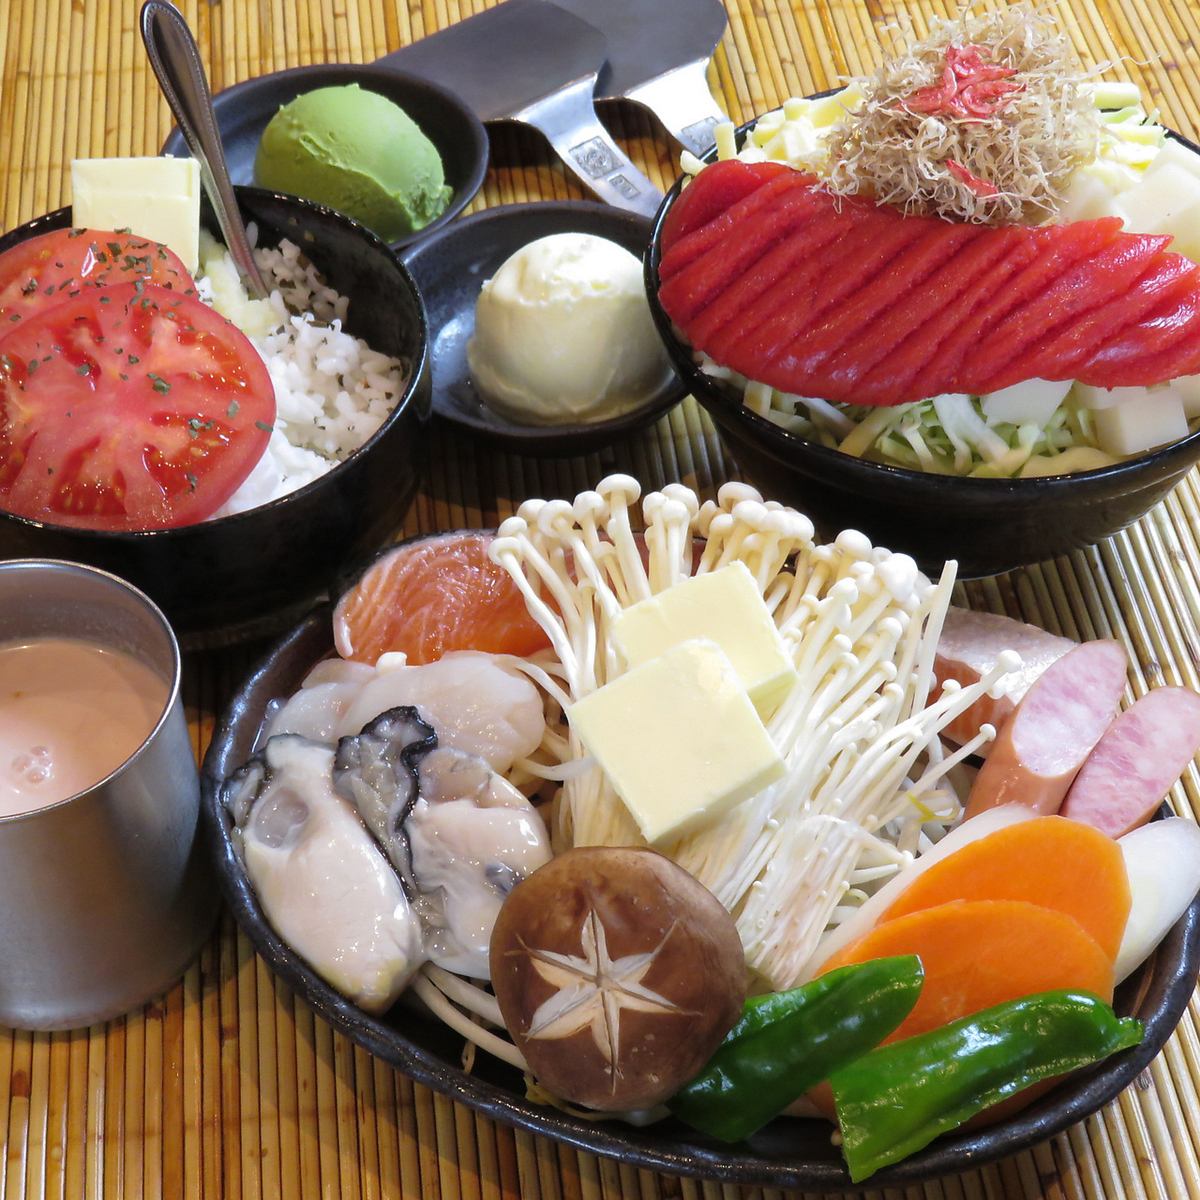 Recommended for people who want to choose a variety of monjayaki and okonomiyaki!